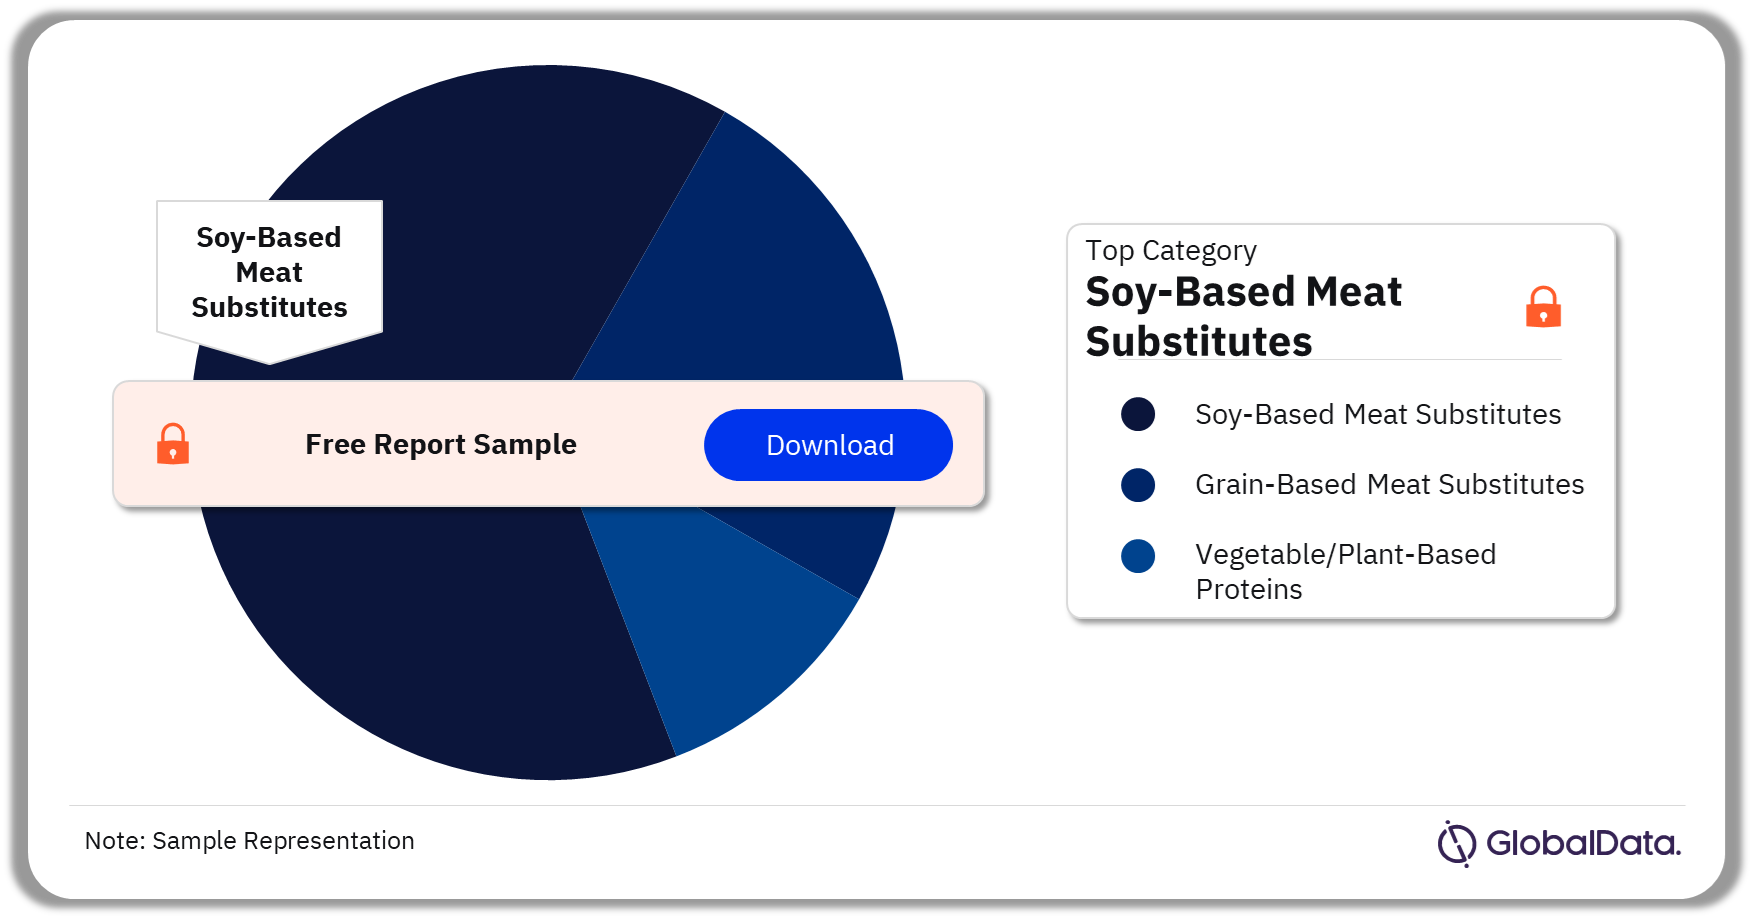 China Meat Substitutes Market, by Categories, 2022 (%)